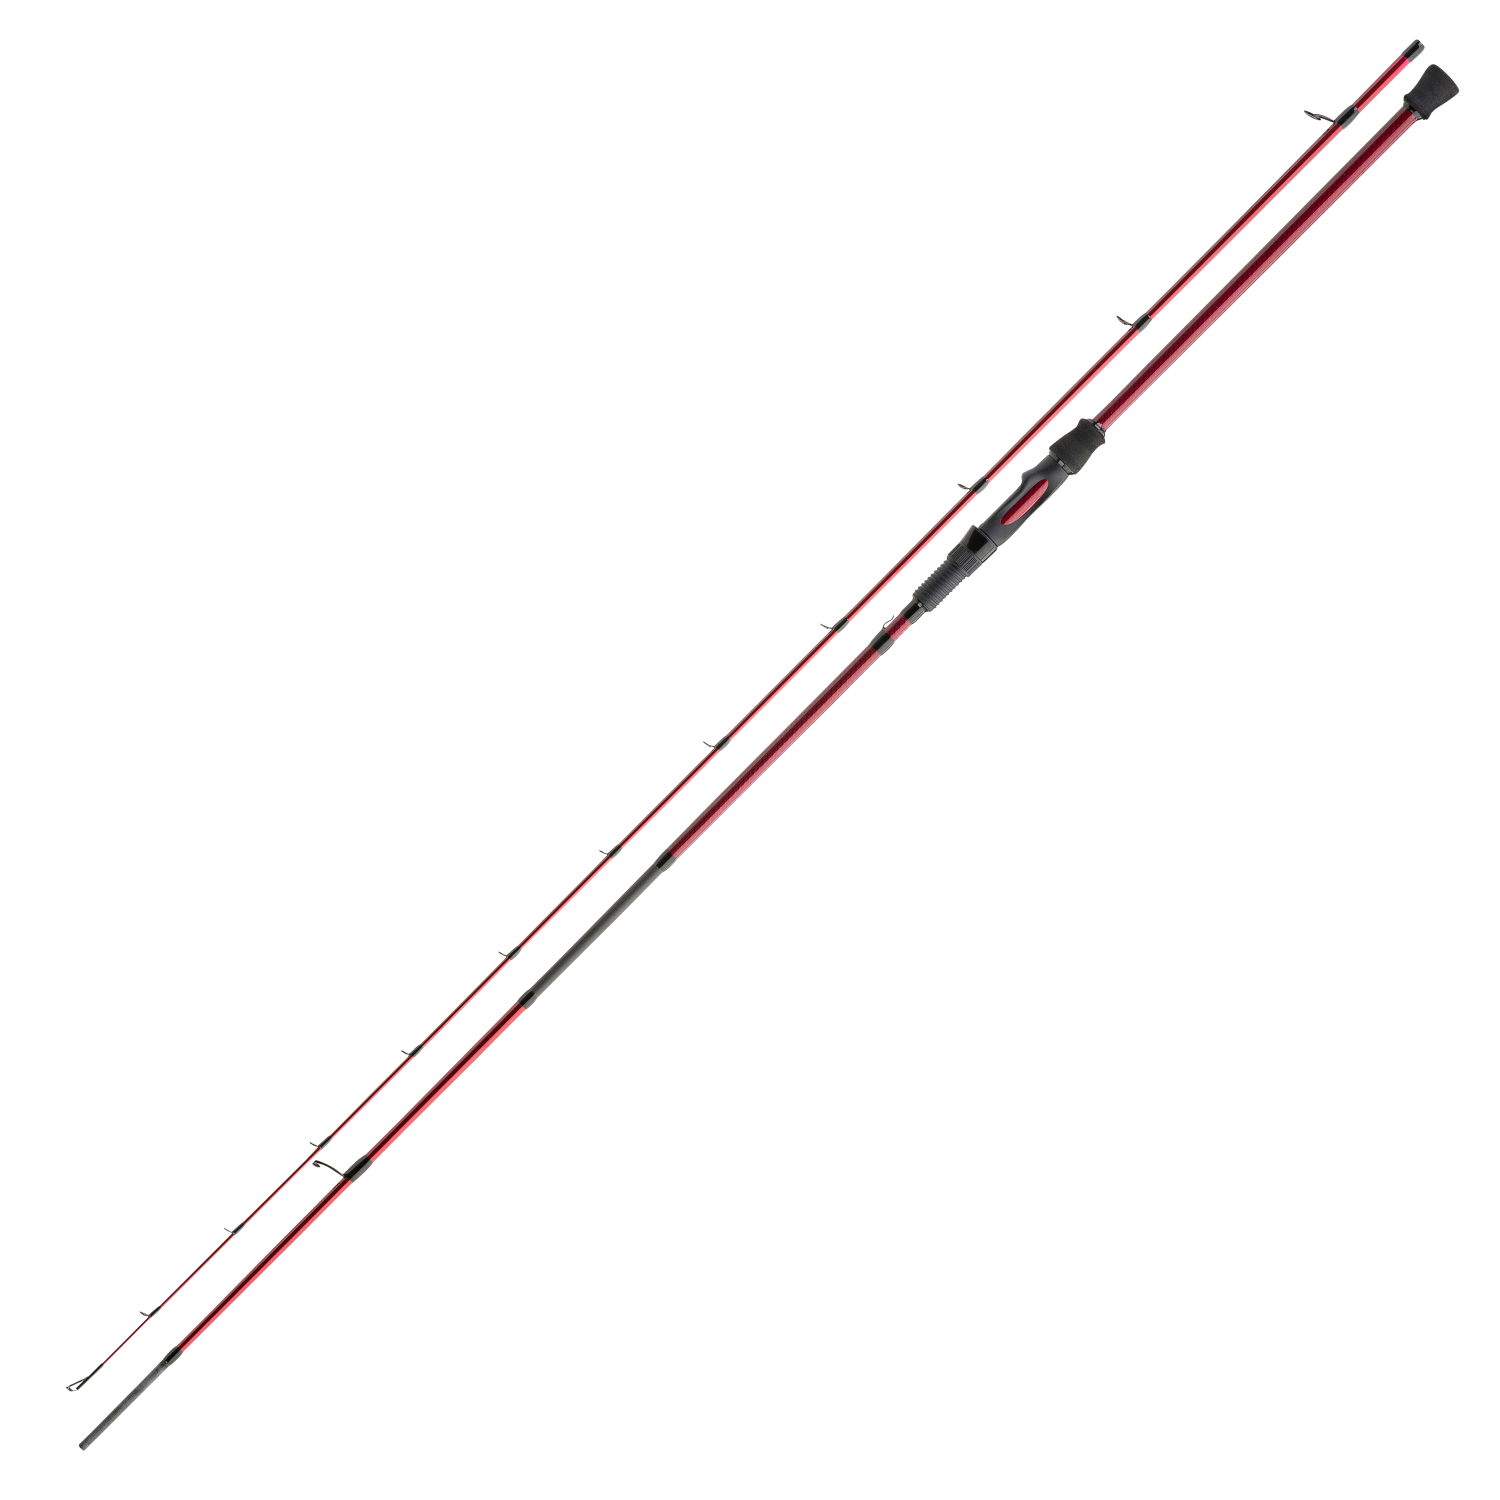 Iron Claw Sänger Iron Claw Double-S Zander Target Fish Rod 